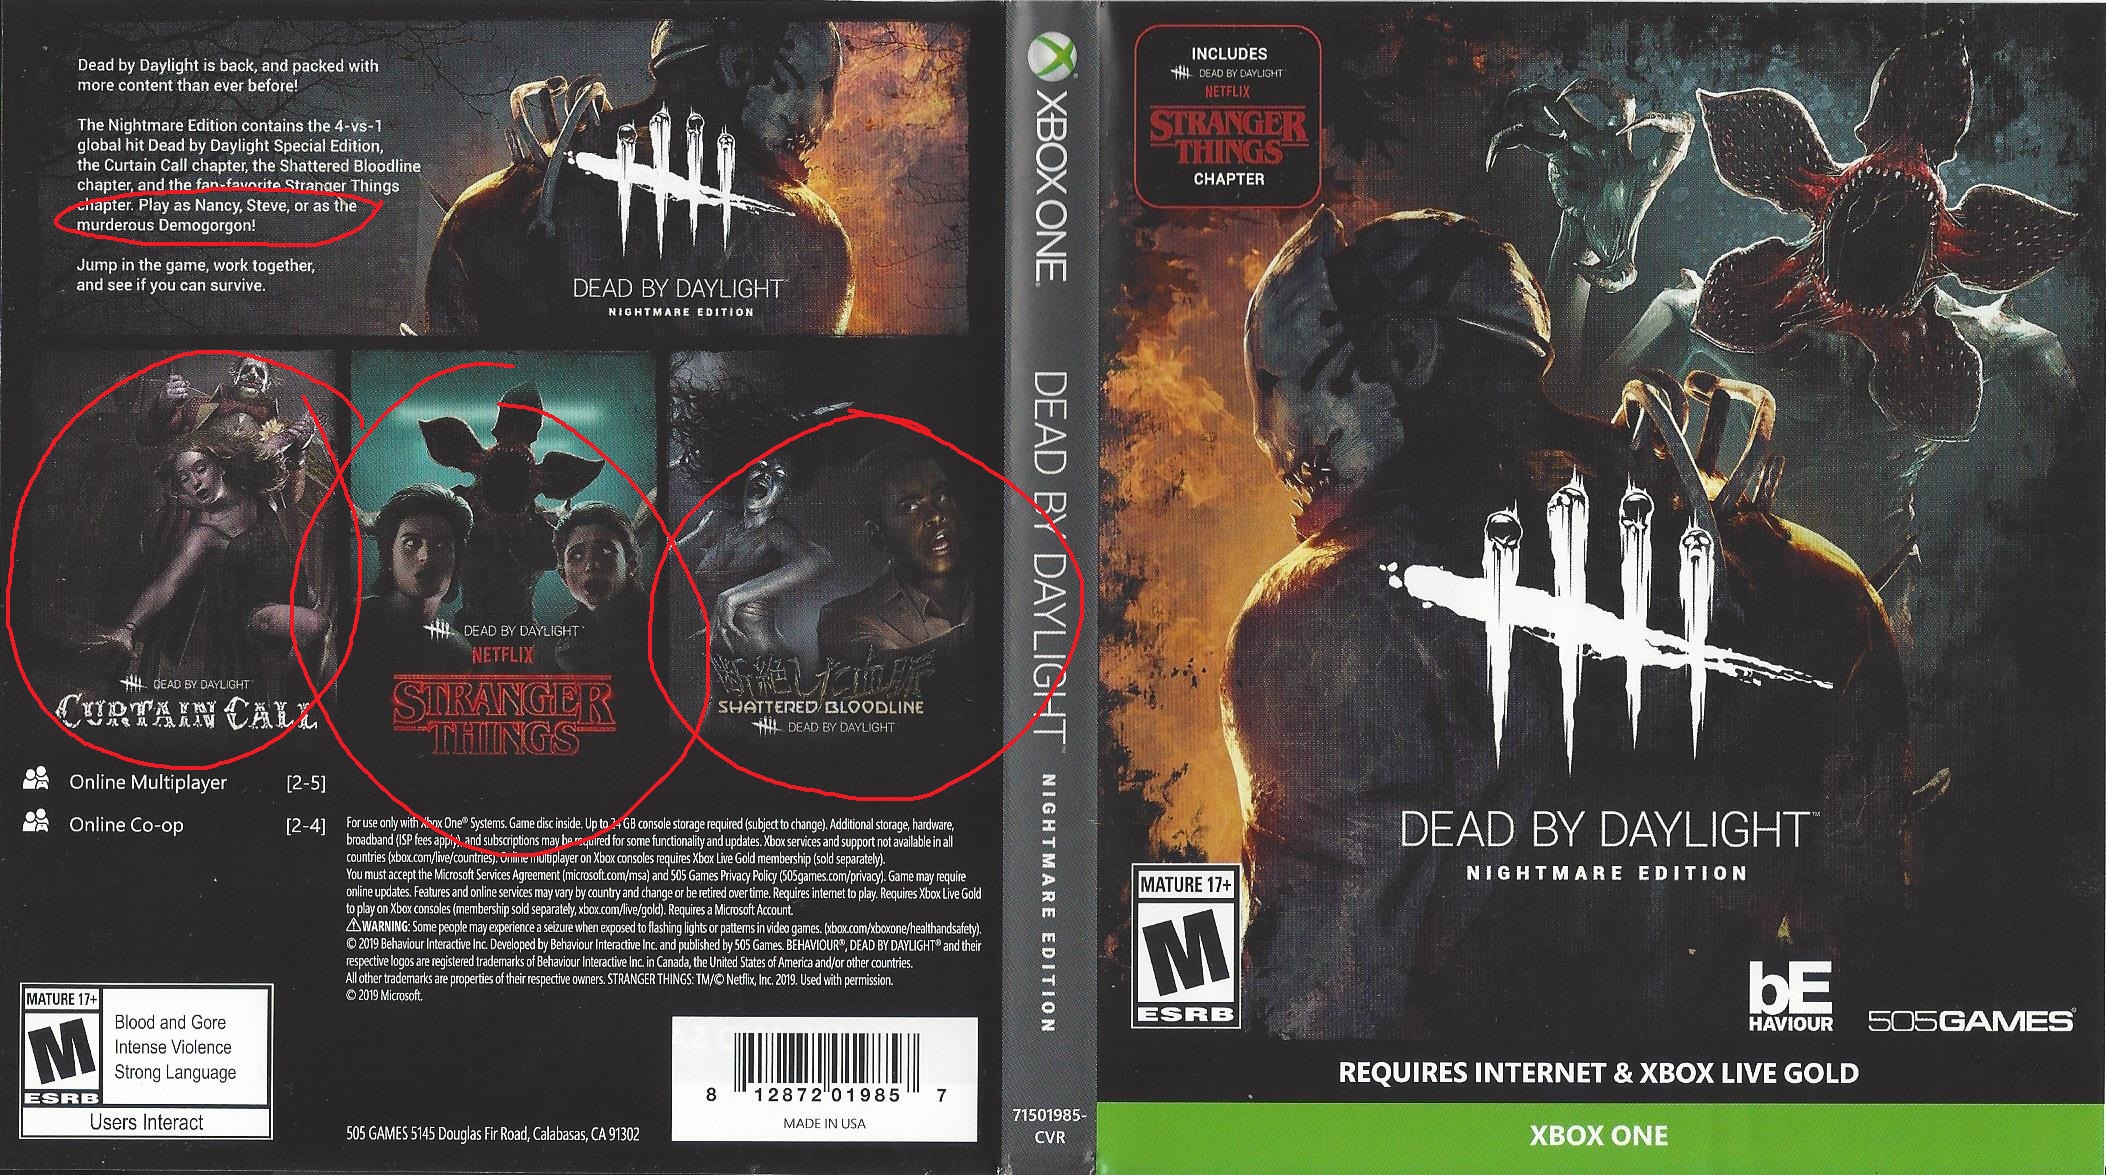 dead by daylight price xbox one